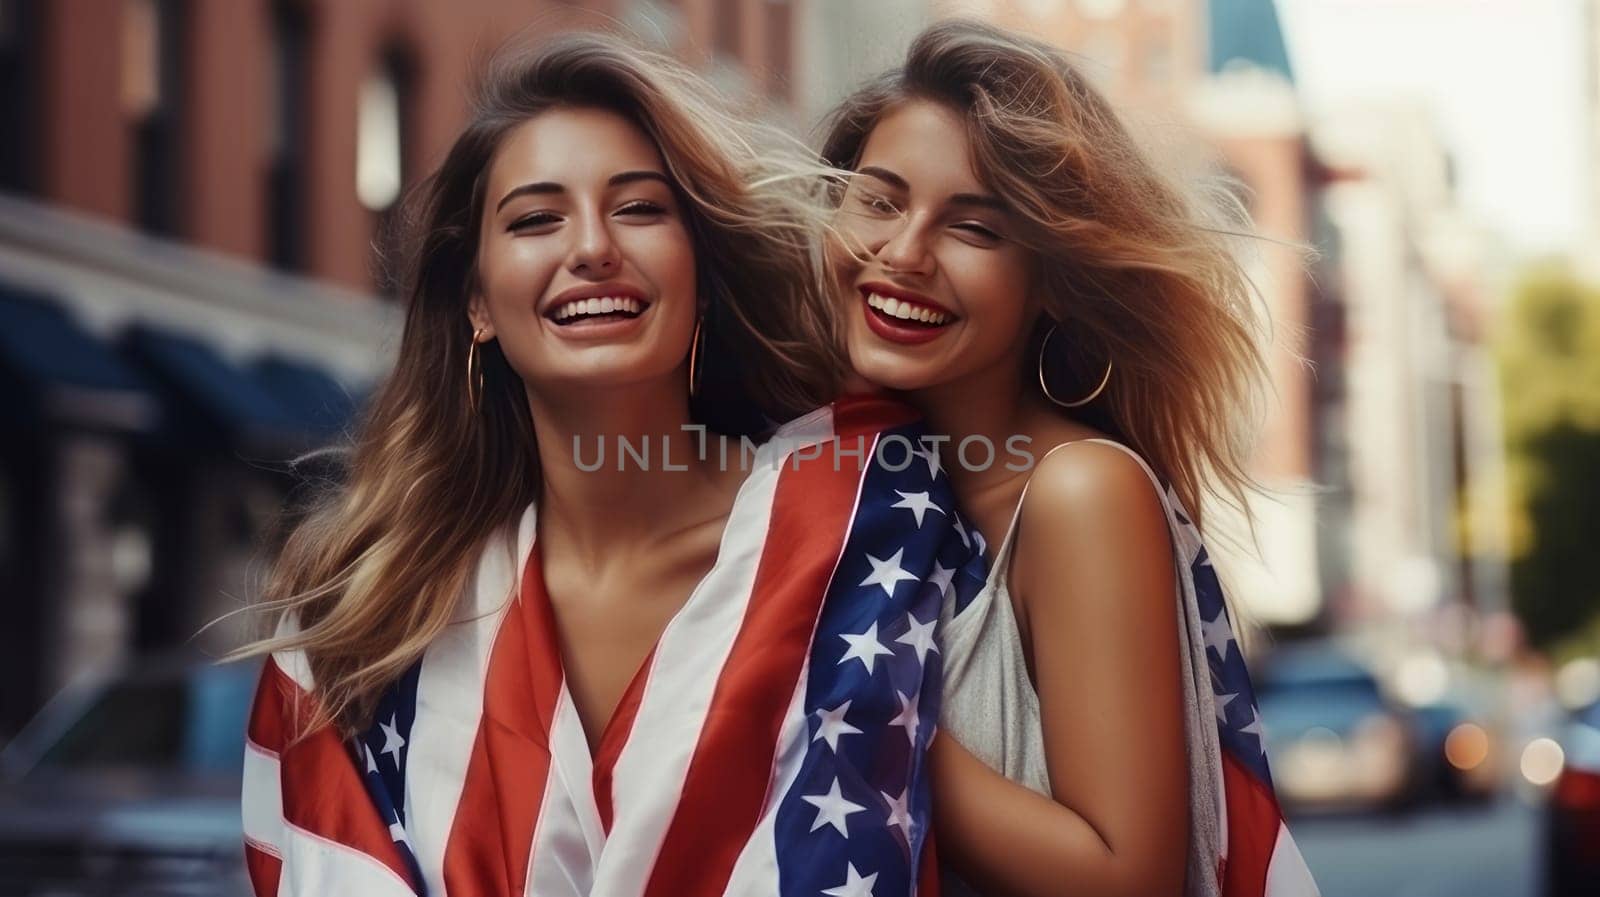 Happy two women with an American flag in city on the Independence Day holidays of the United States of America. American President's Day, USA Independence Day, American flag colors background, 4 July, February holiday, stars and stripes, red and blue